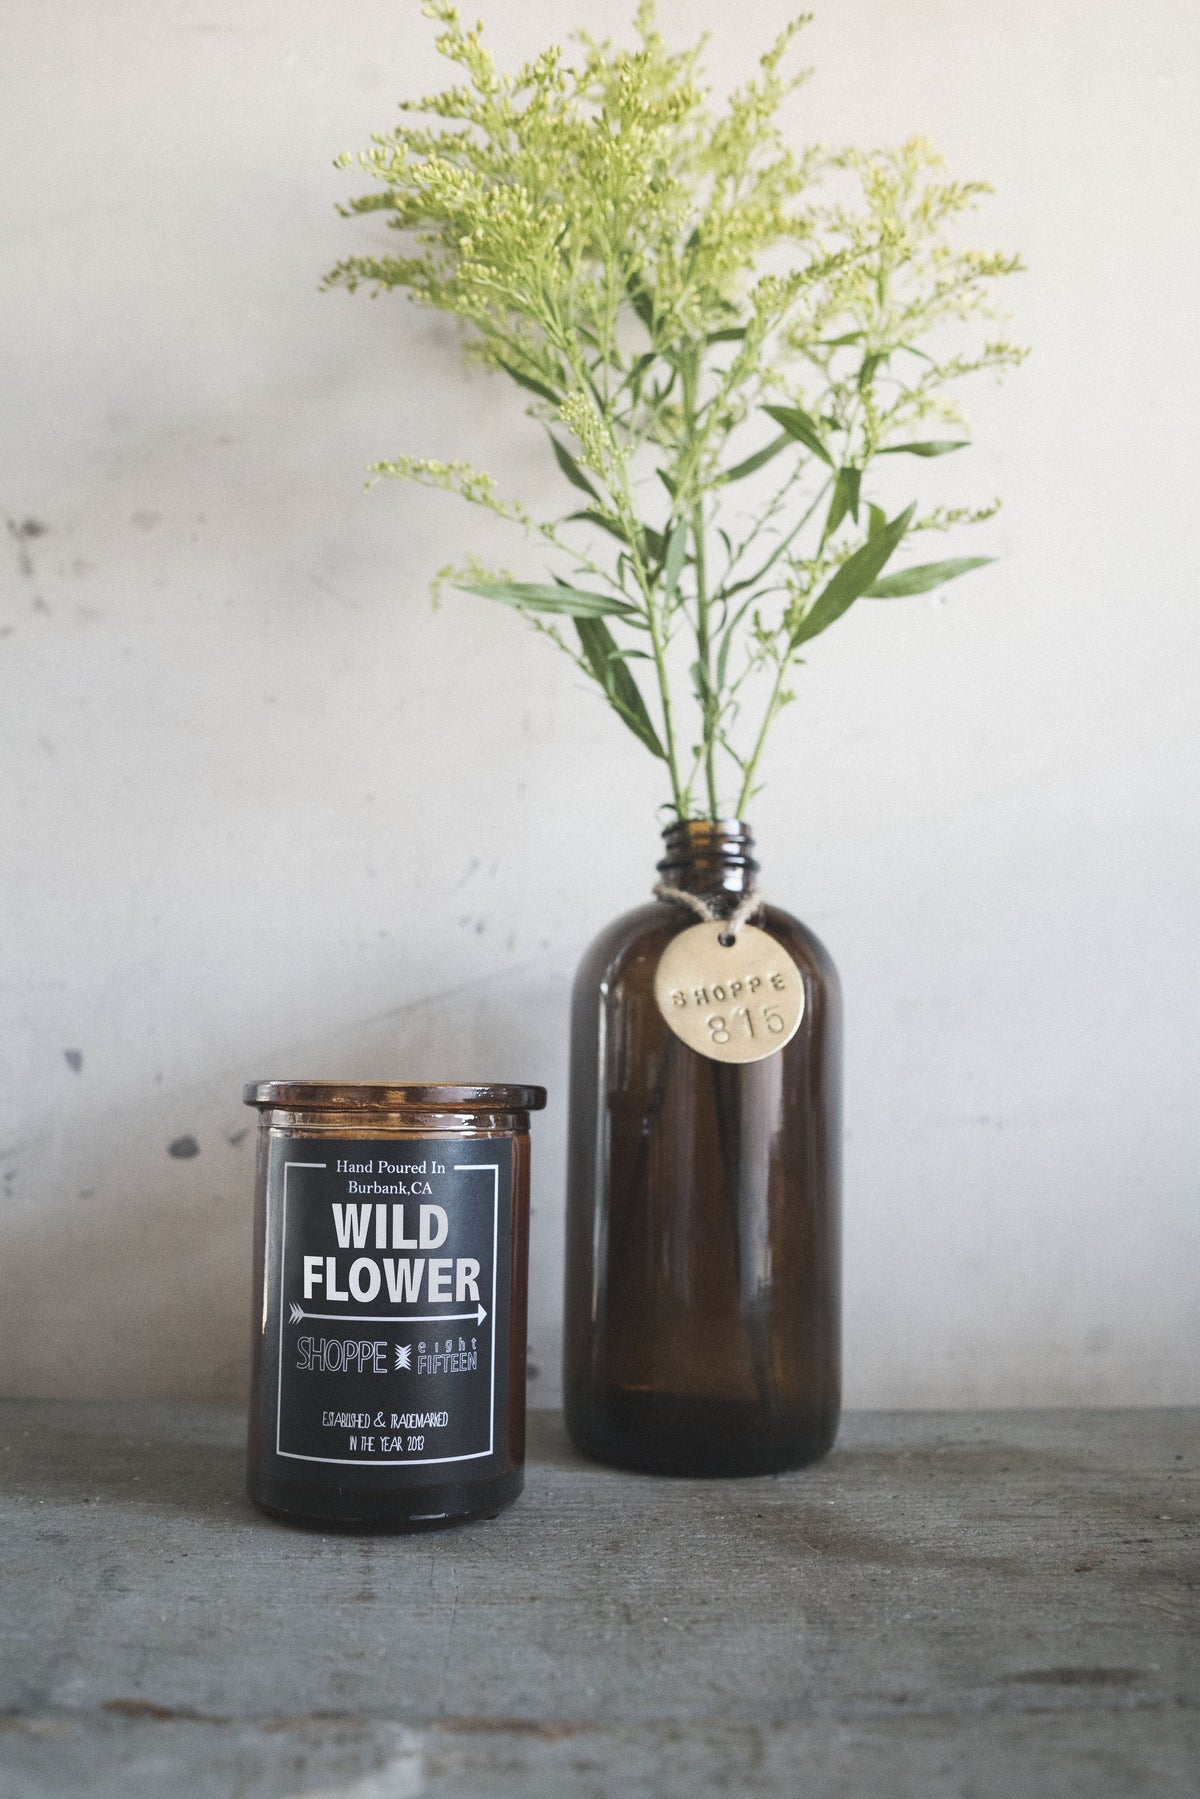 Wildflower Inspired Soy Candle in Amber Jar with Decorative Greenery and brass tag